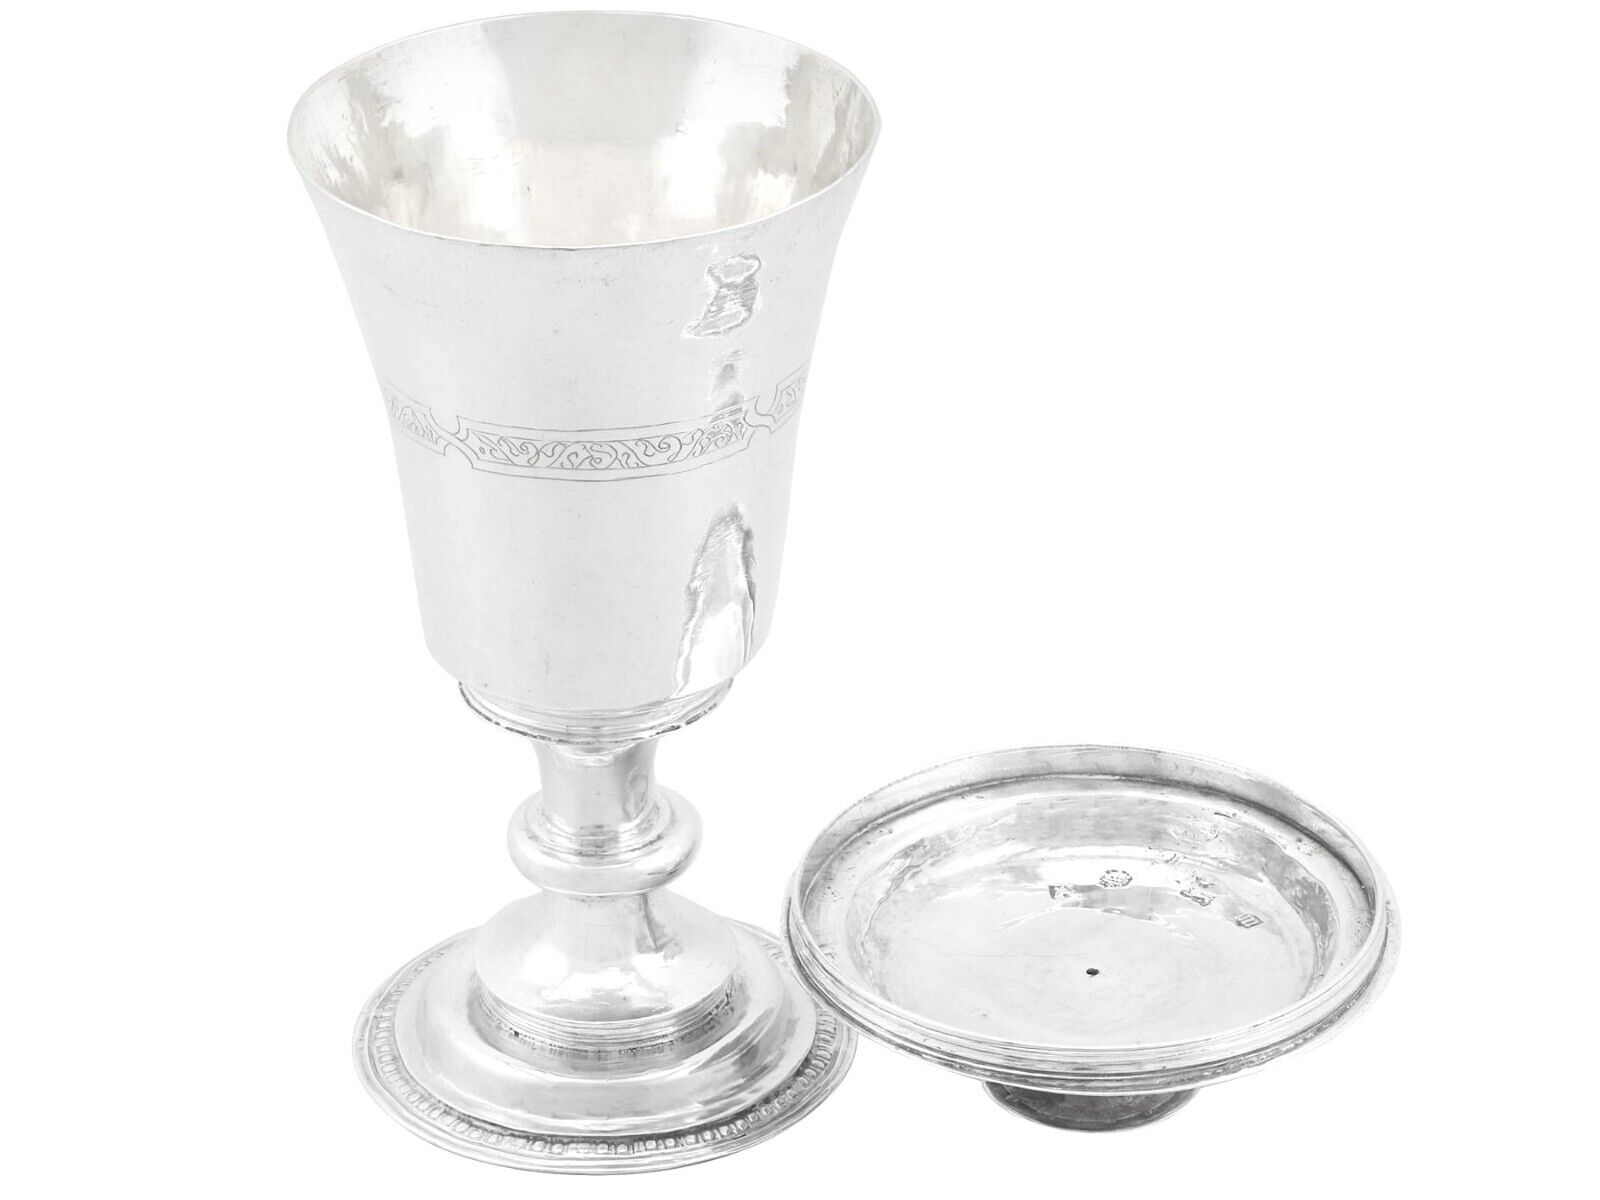 Elizabethan Sterling Silver Communion Chalice and Paten 214g Height 16.1cm